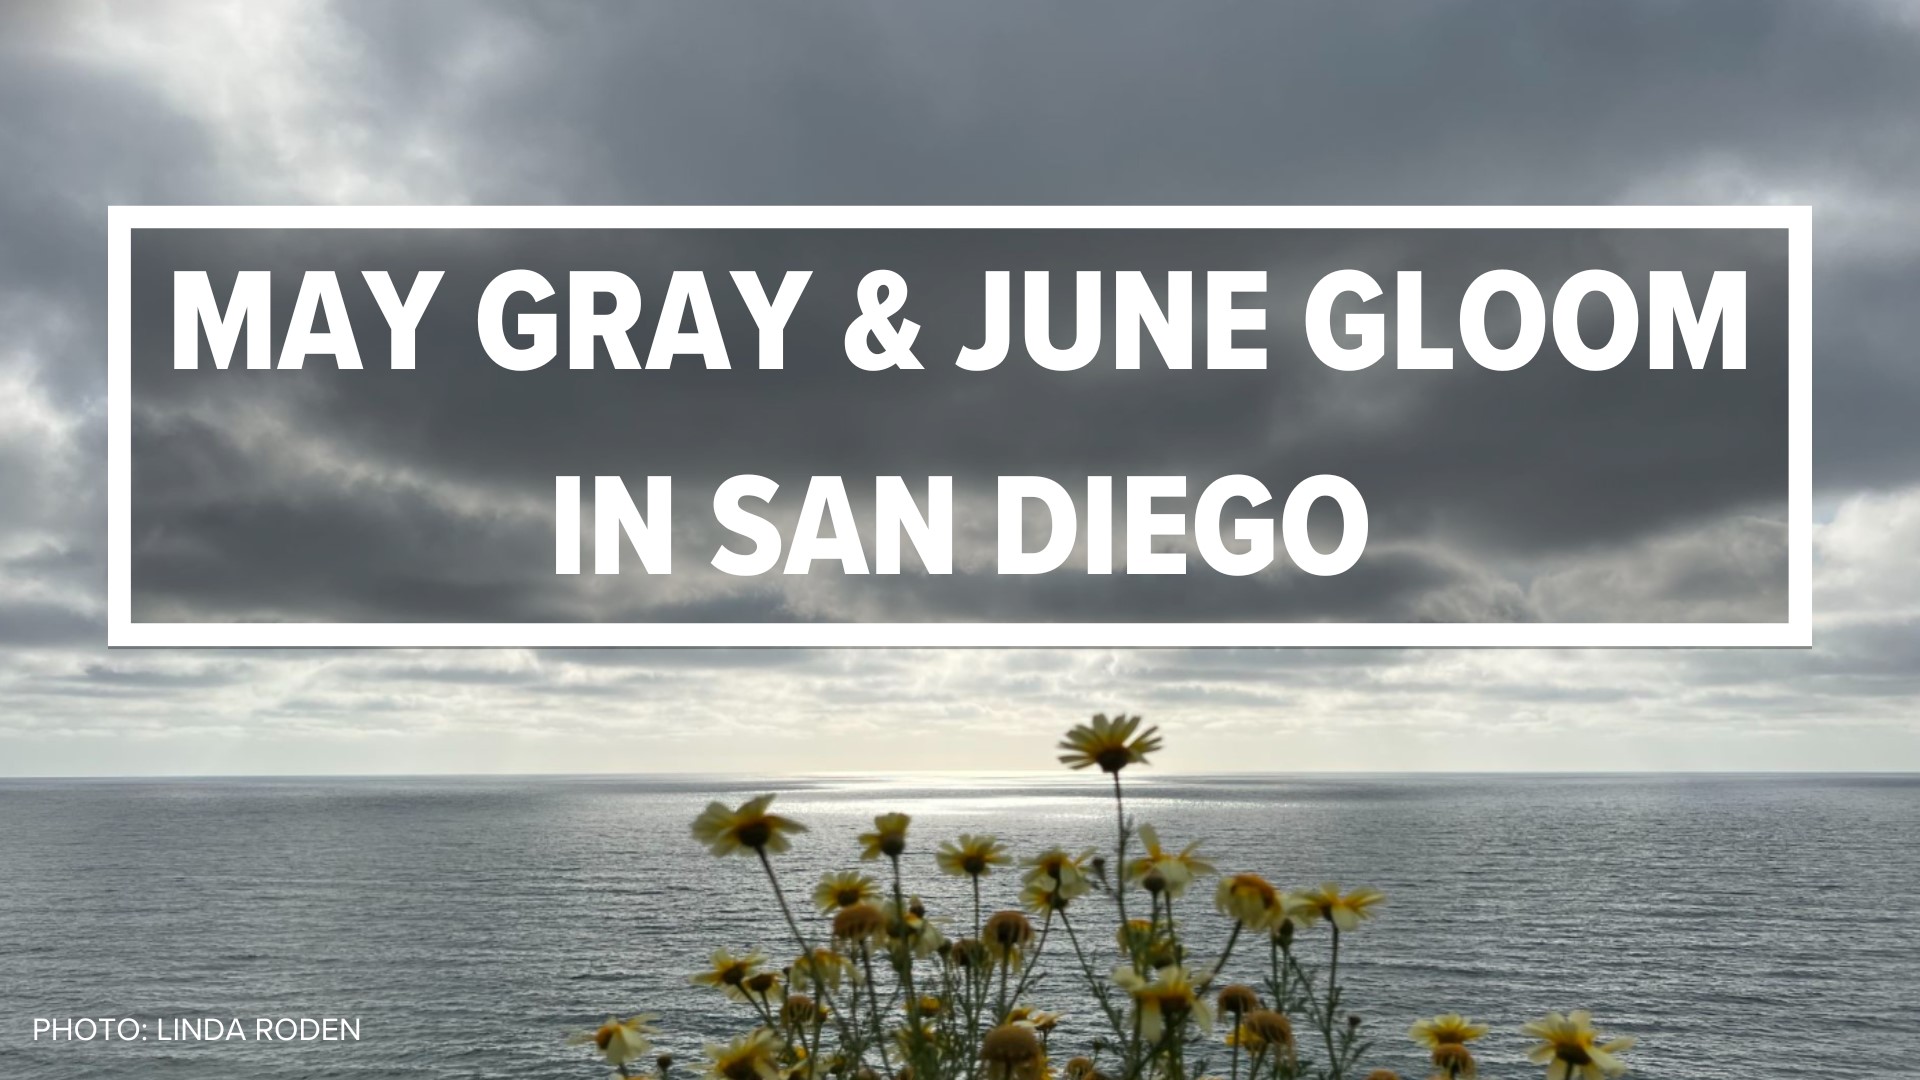 The marine layer is a common weather phenomenon along the California coast. What makes May and June exceptional months for this overcast pattern is cold ocean water.